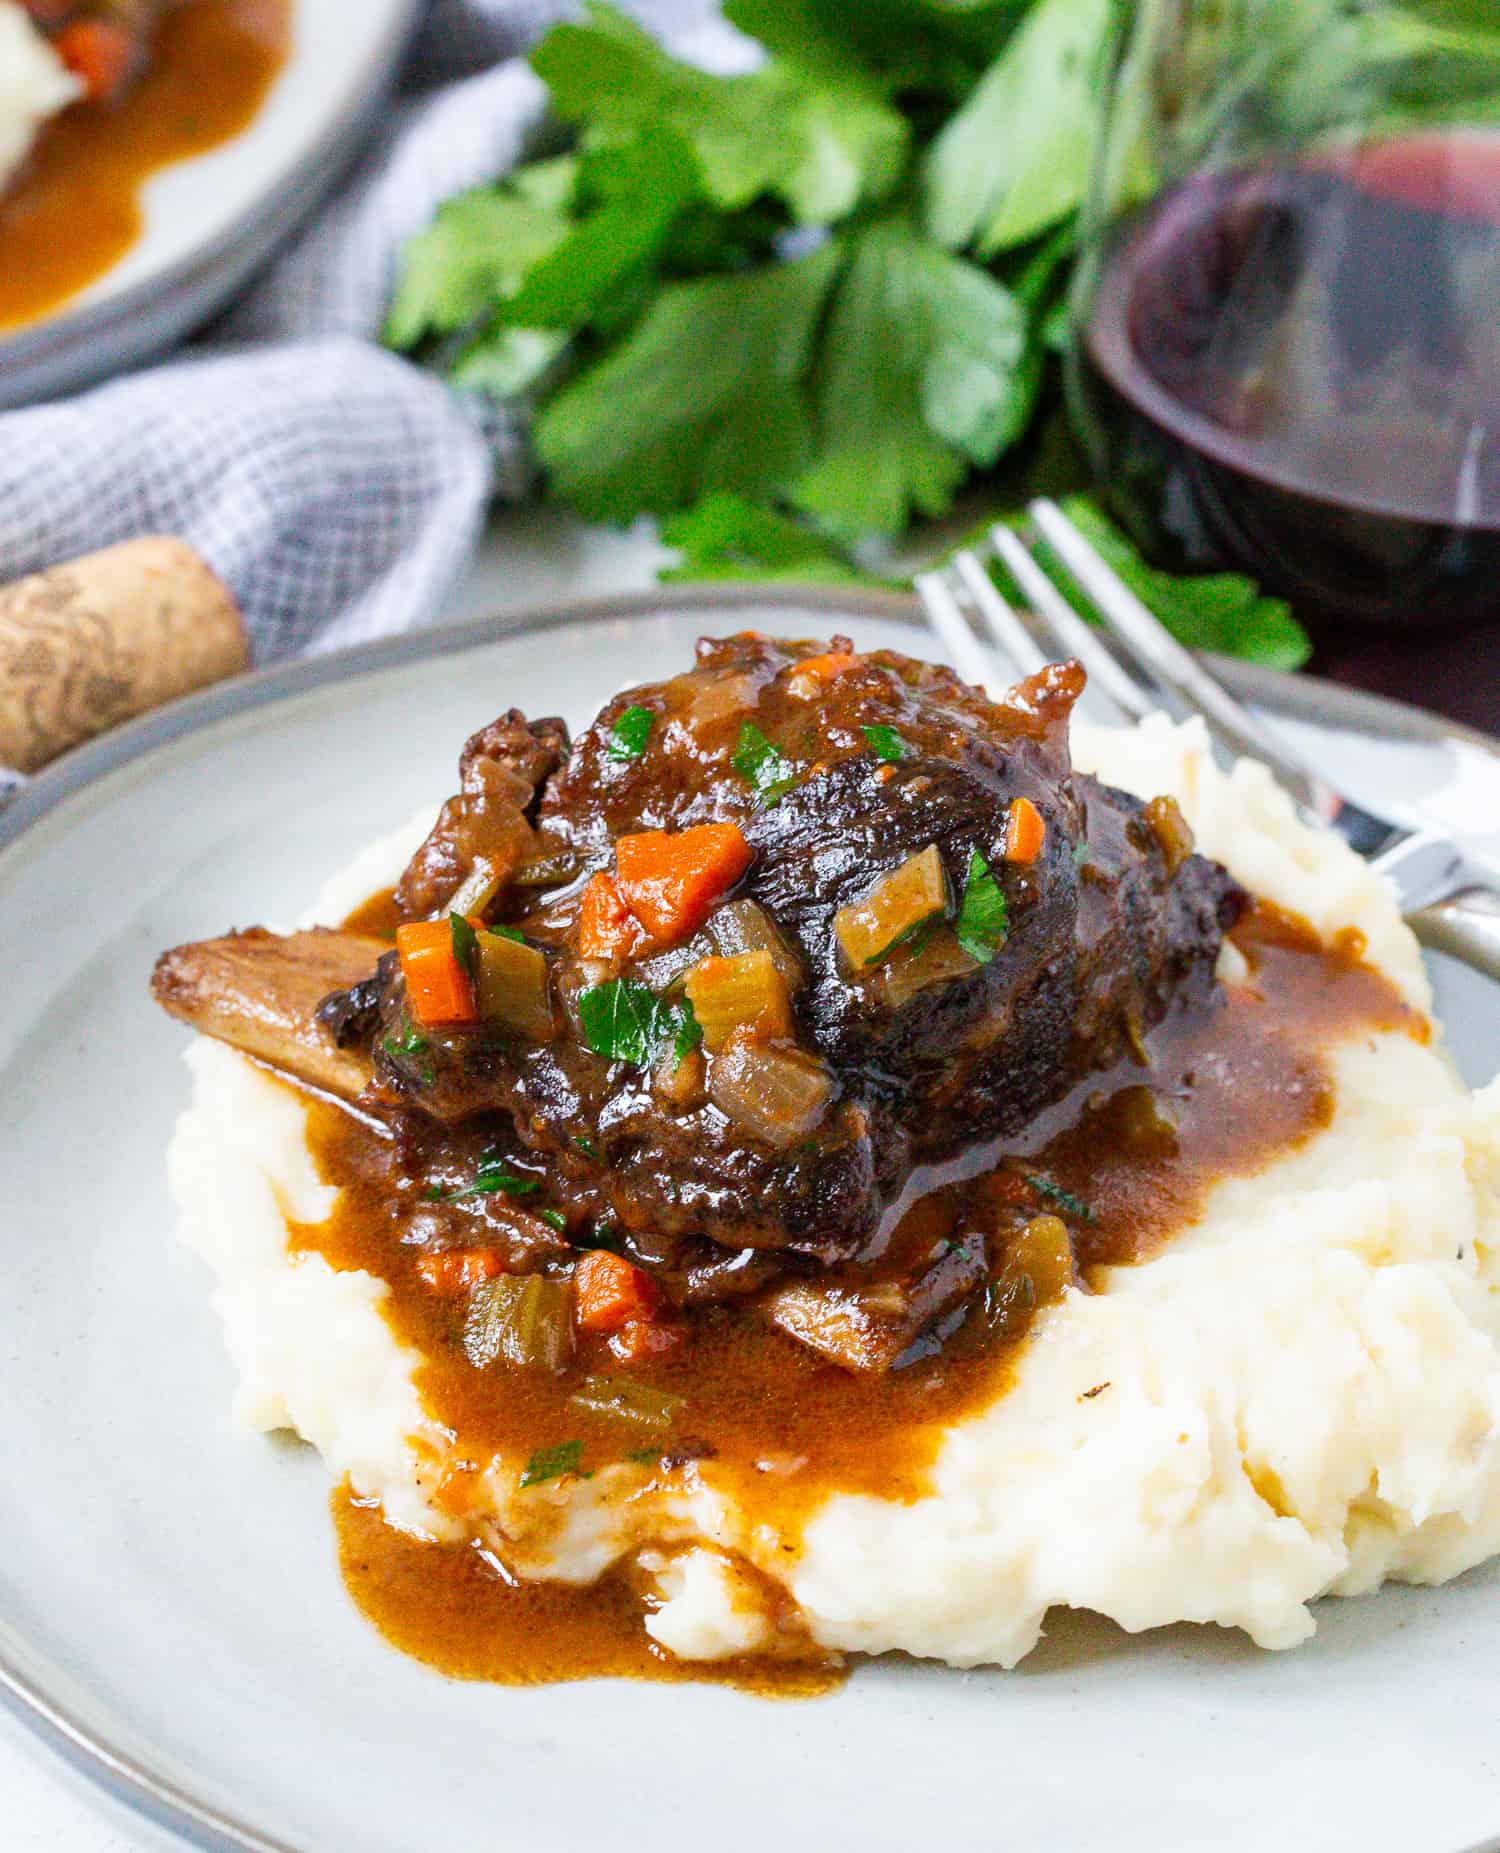 Red wine braised short rib, placed atop mashed potatoes.